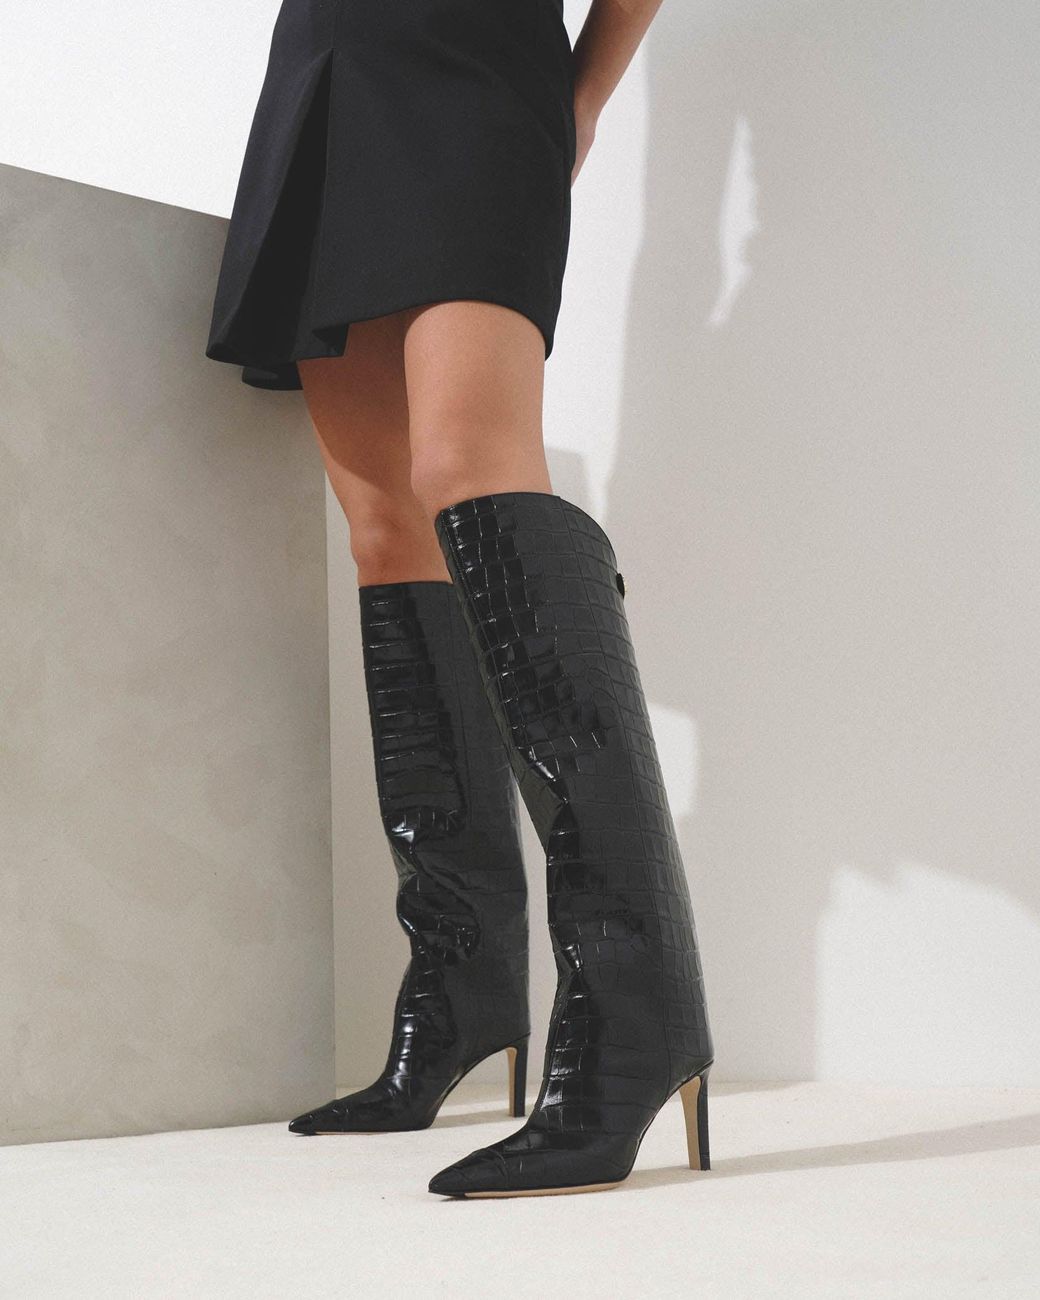 Jimmy Choo Alizze 85 Embossed Leather Boots in Black | Lyst